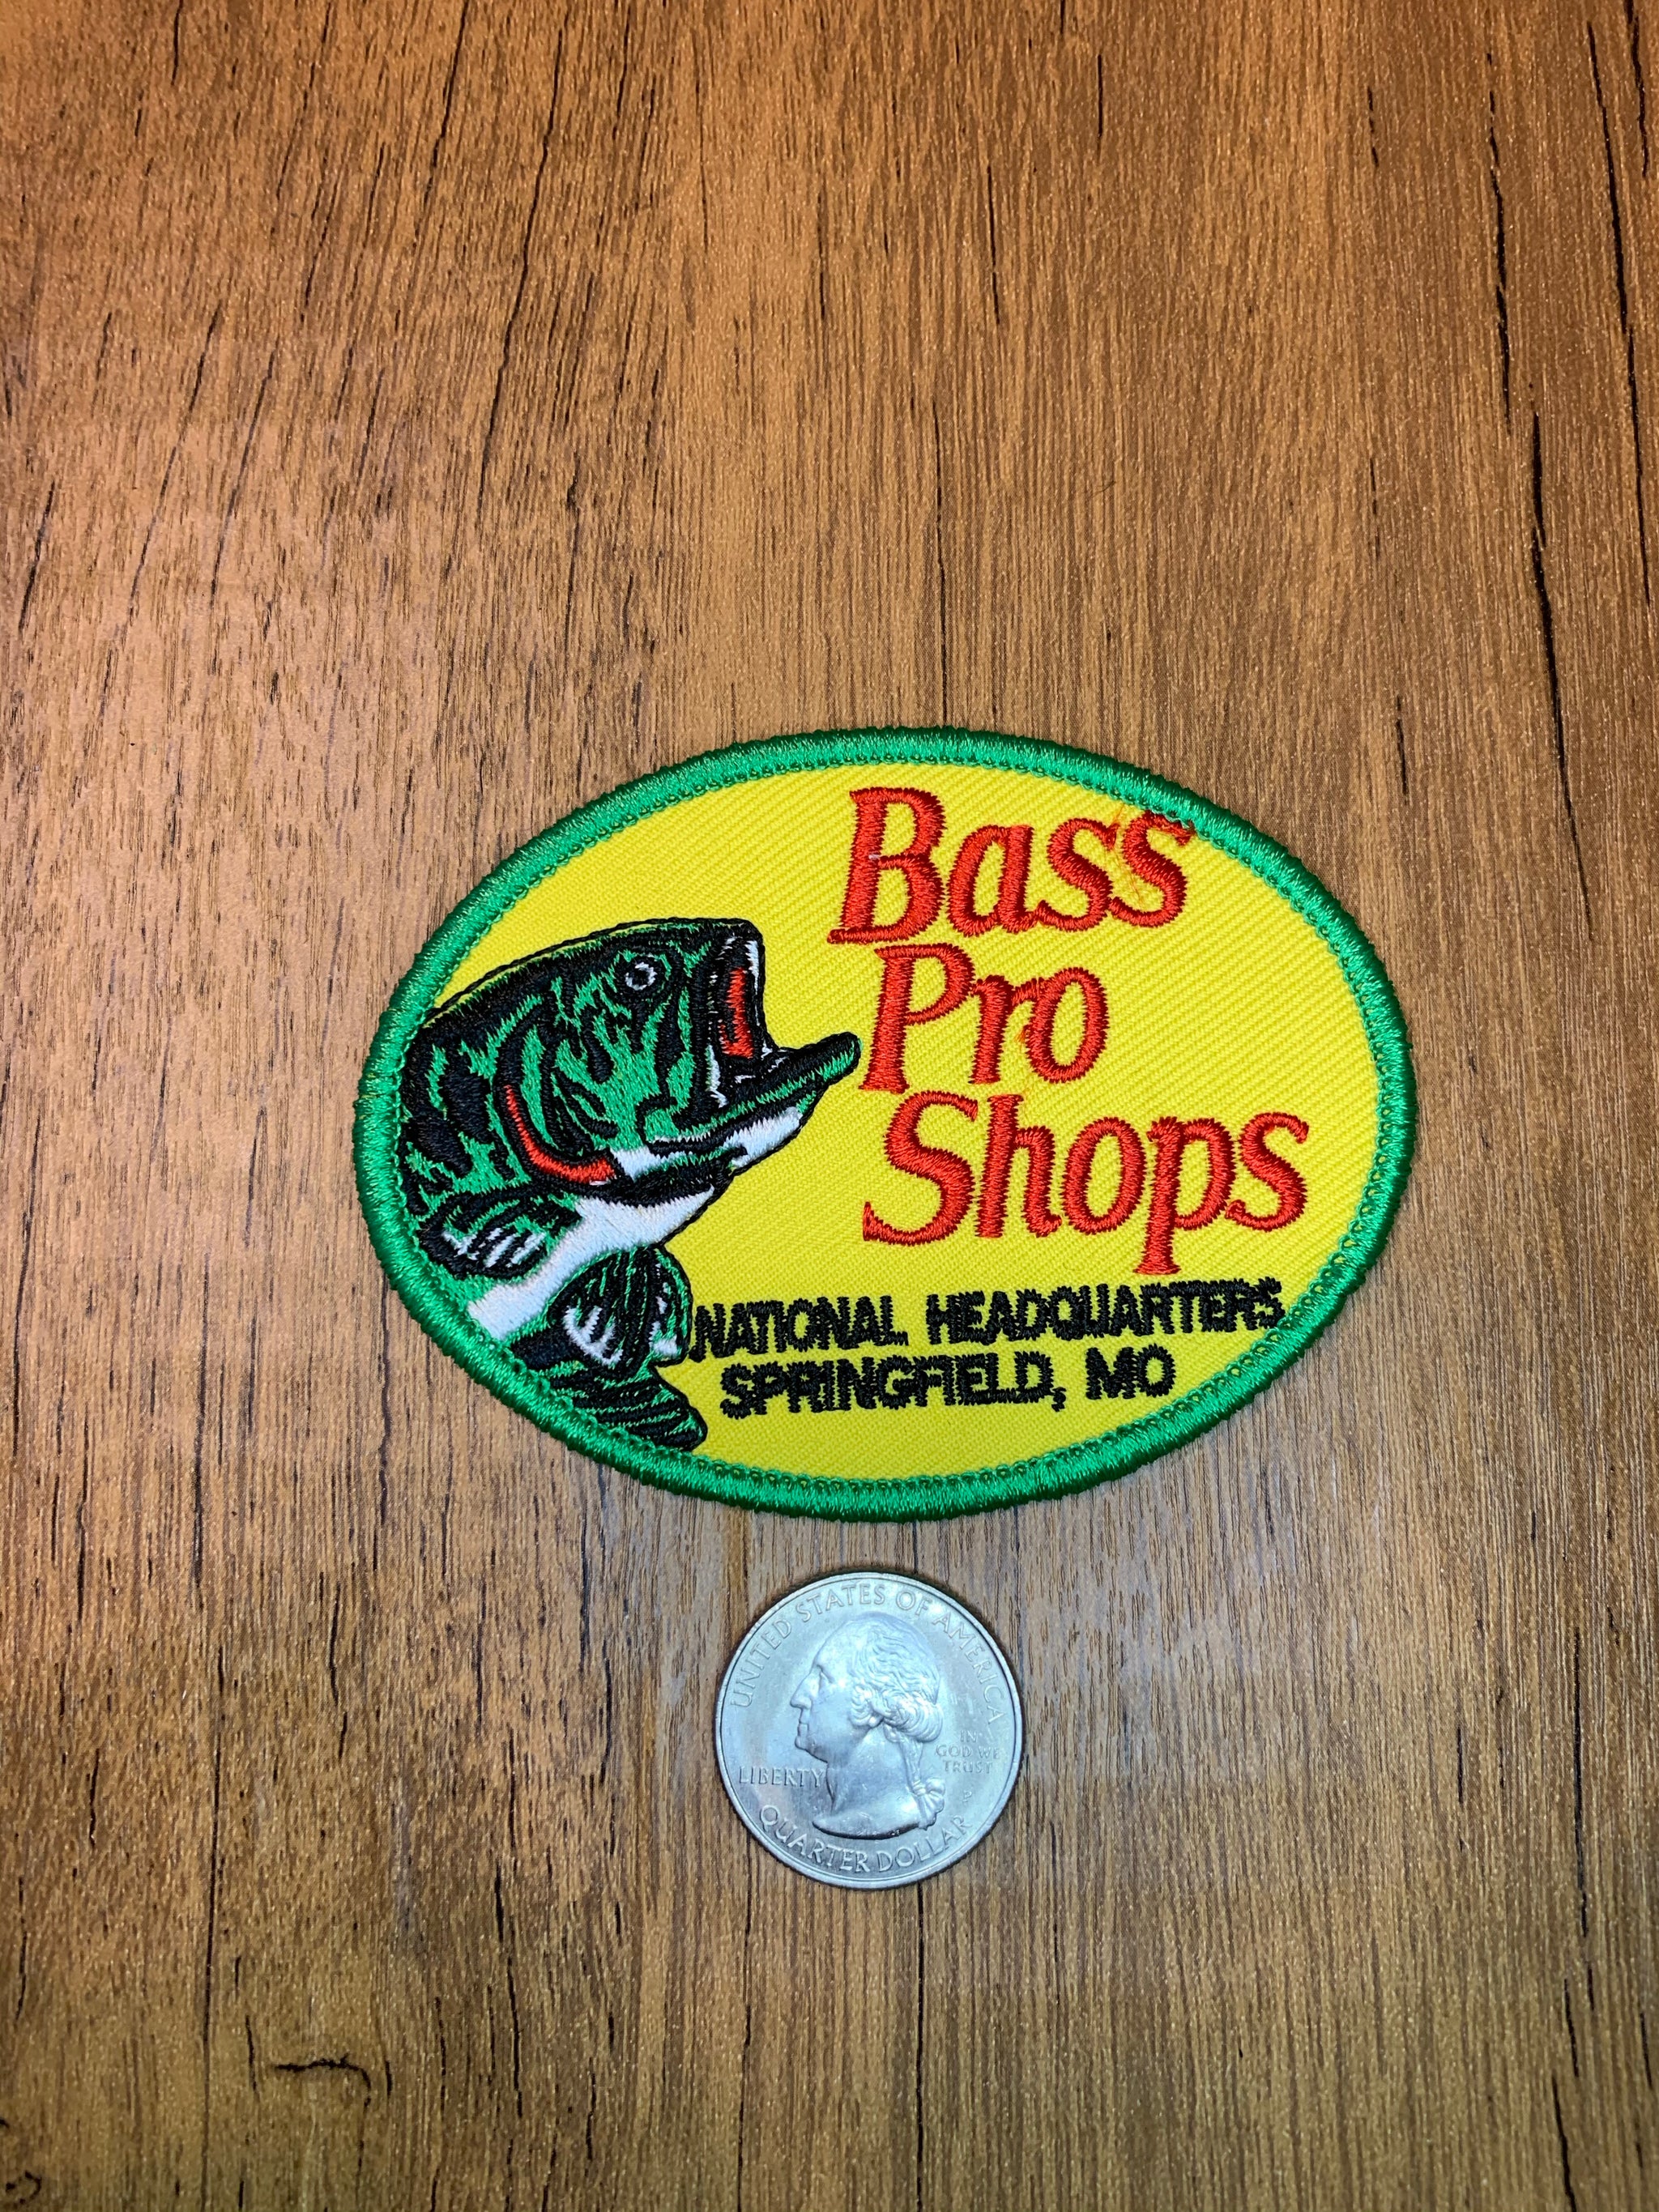 Bass Pro Shops, Fishing, Hunting, Camping, Outdoors - The Mad Hatter Company